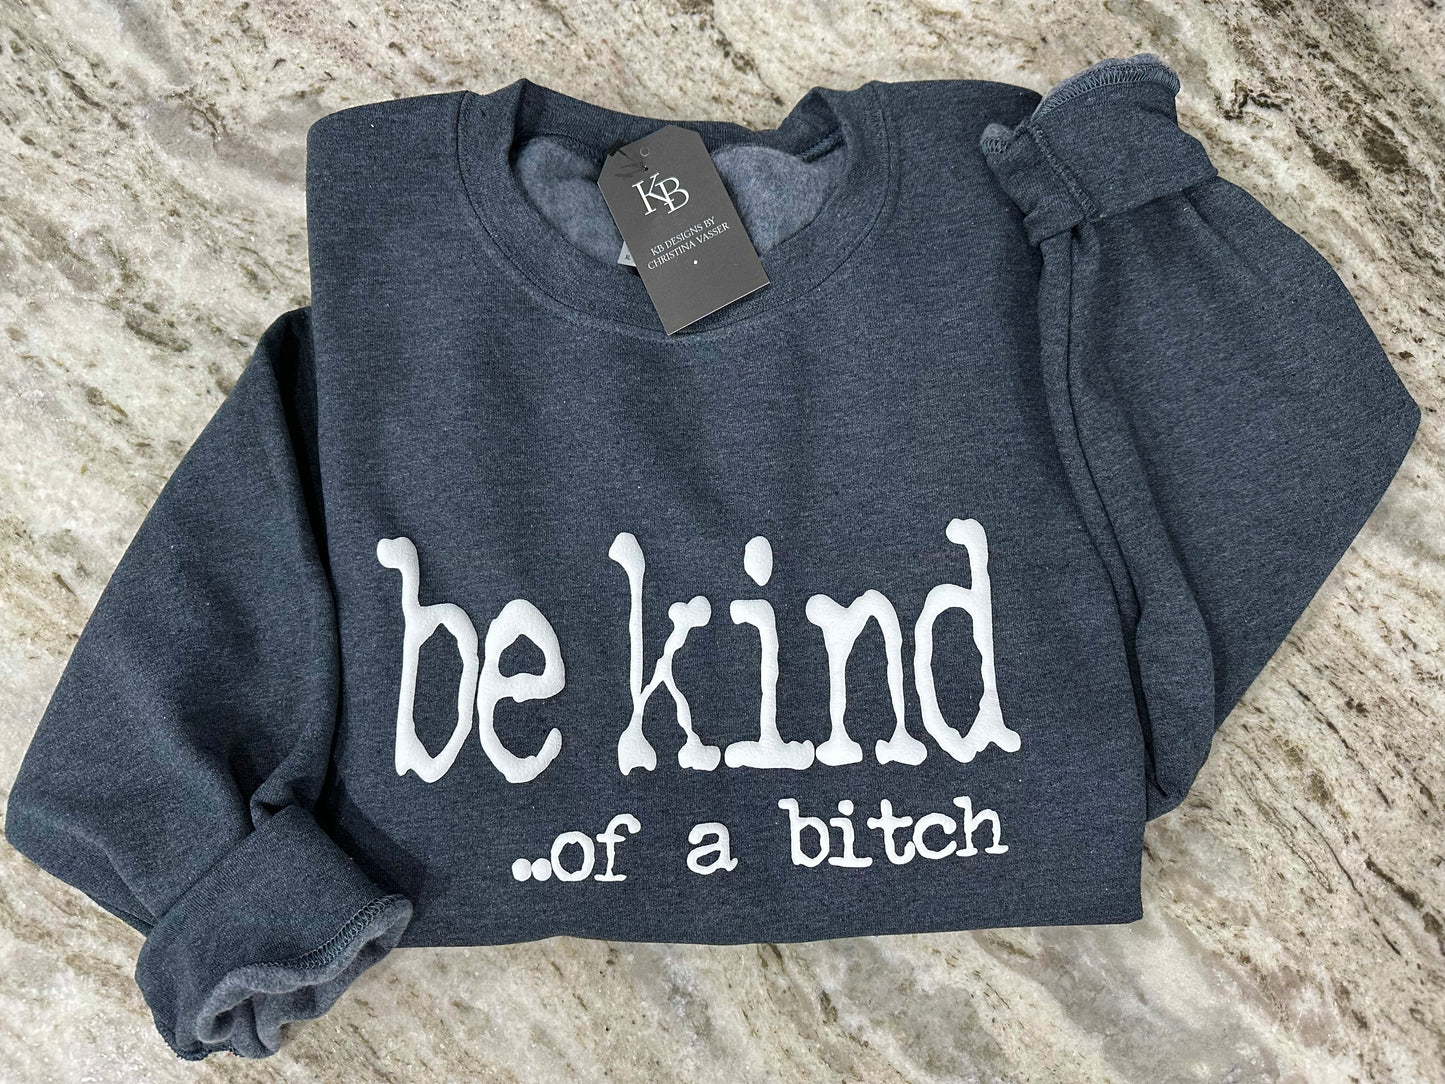 Be Kind of a Bit@h